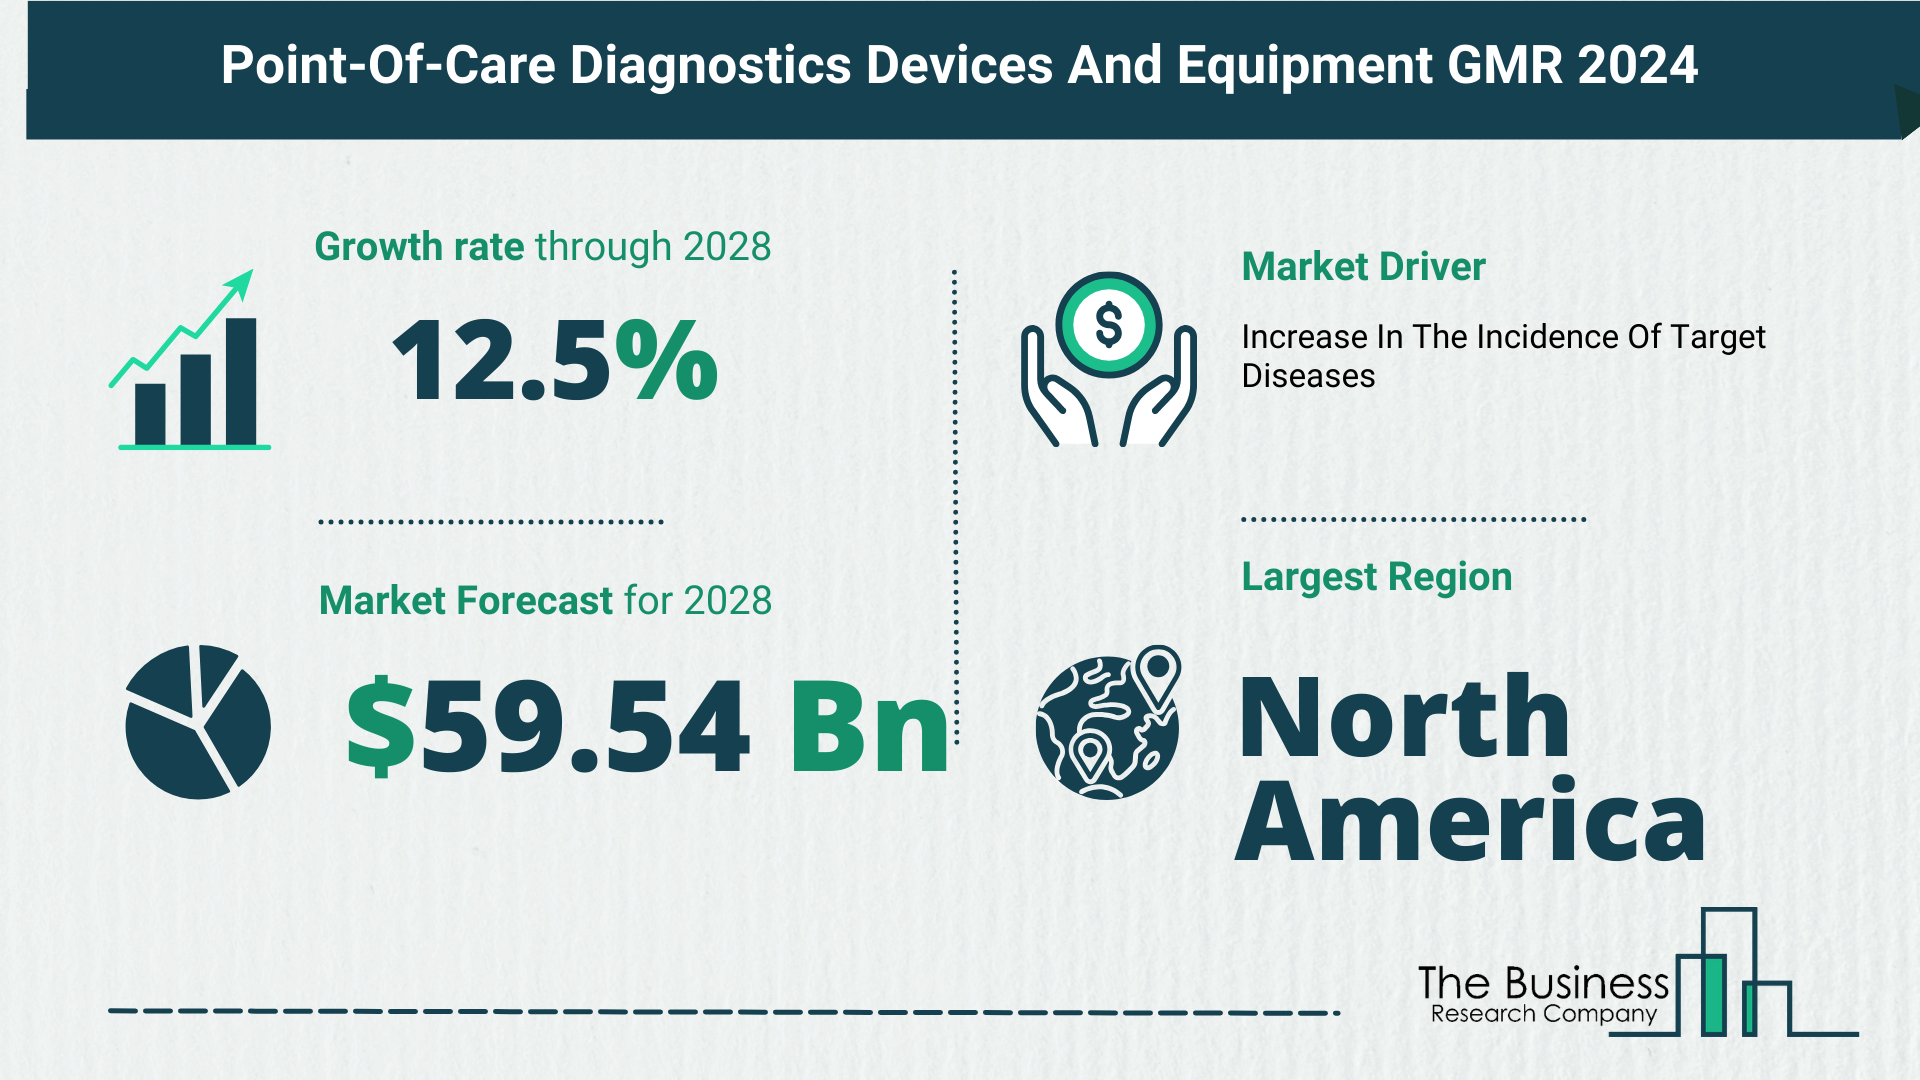 Point-of-Care Diagnostics Devices And Equipment Market Report 2024: Market Size, Drivers, And Trends